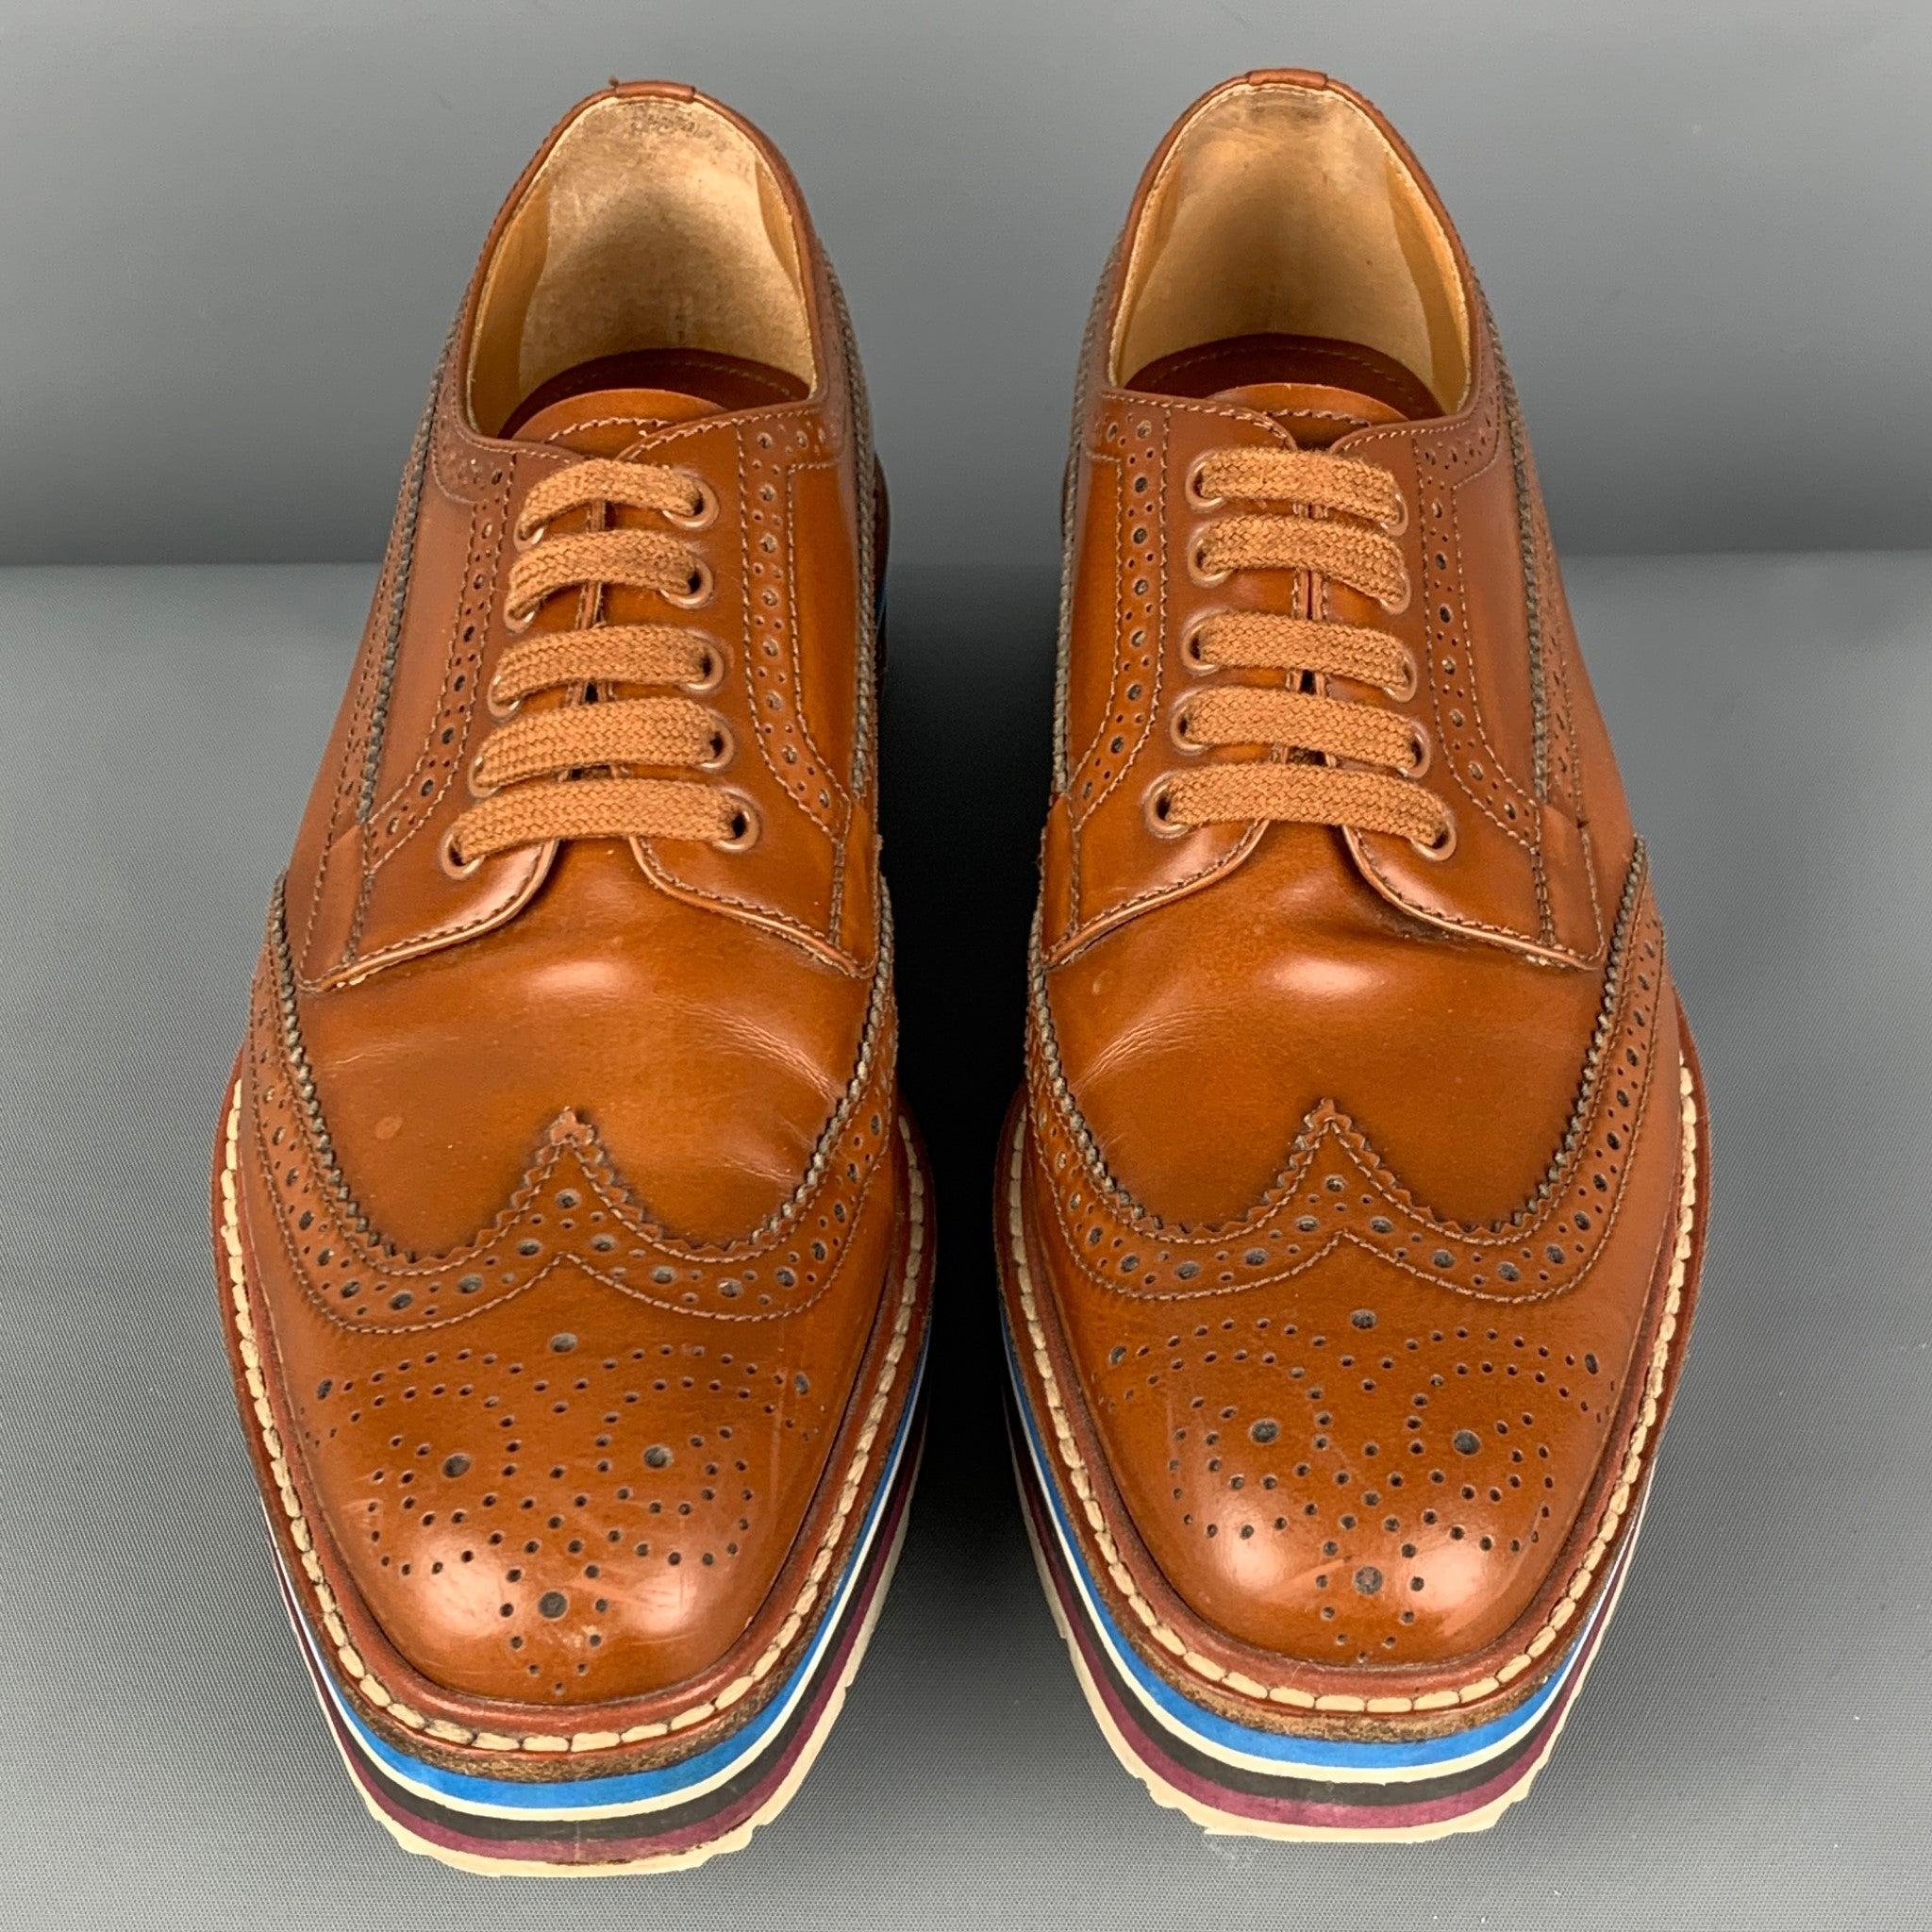 Women's PRADA Size 6.5 Tan Leather Perforated Wingtip Shoes For Sale